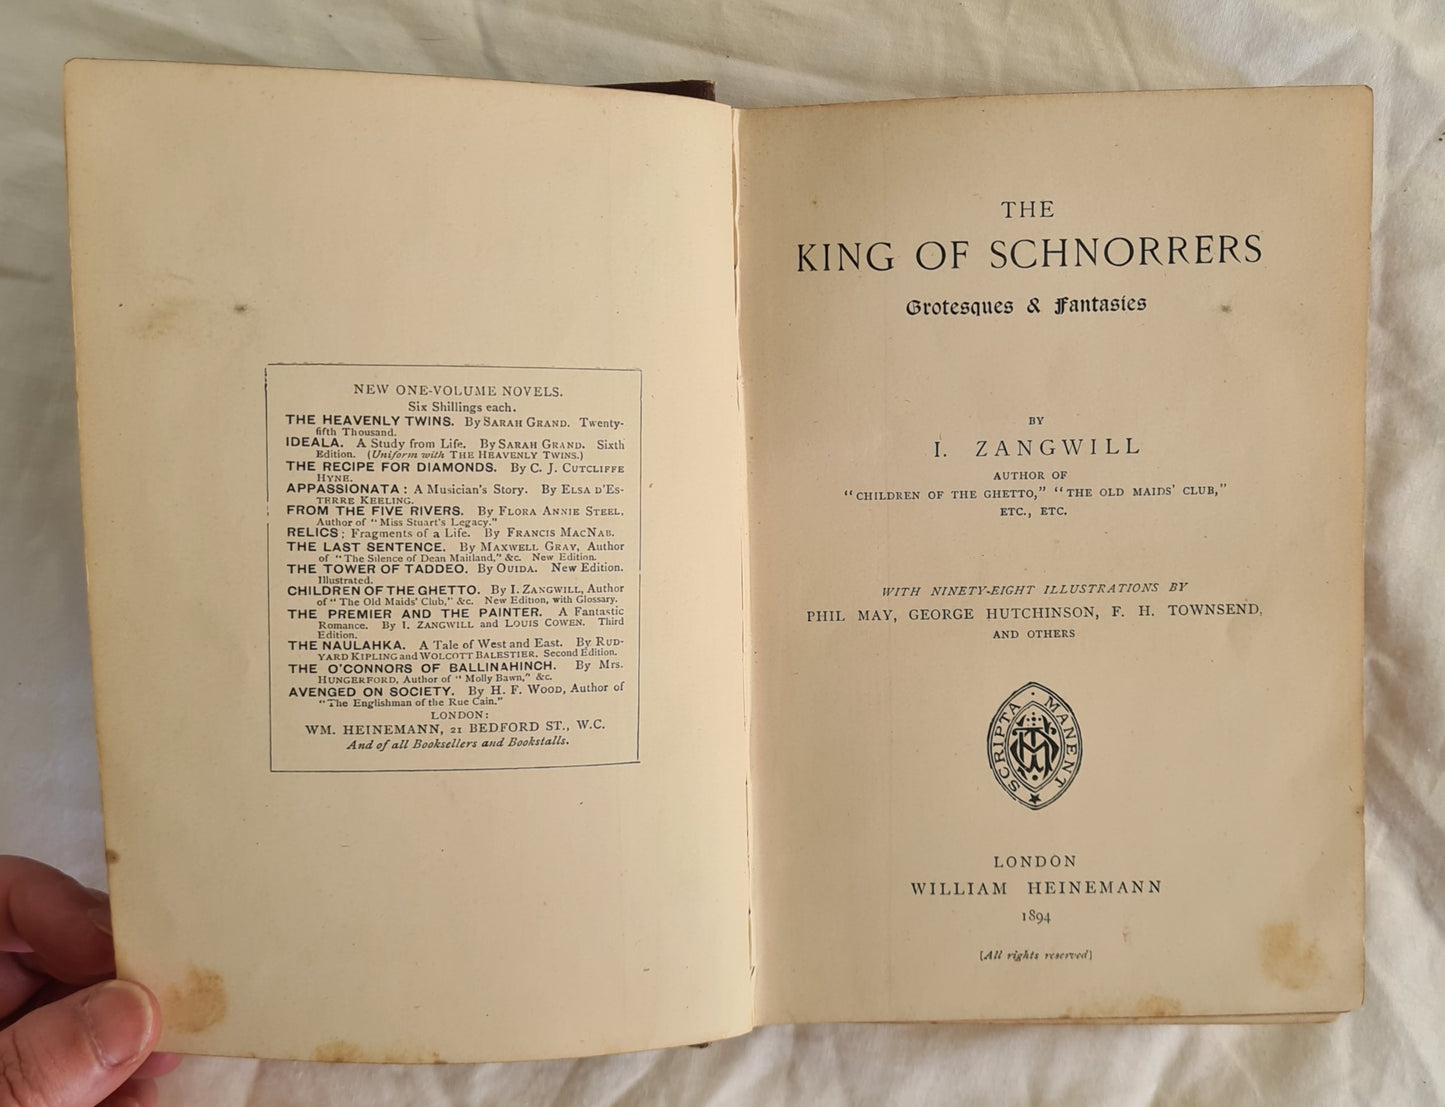 The King of Schnorrers by I. Zangwill